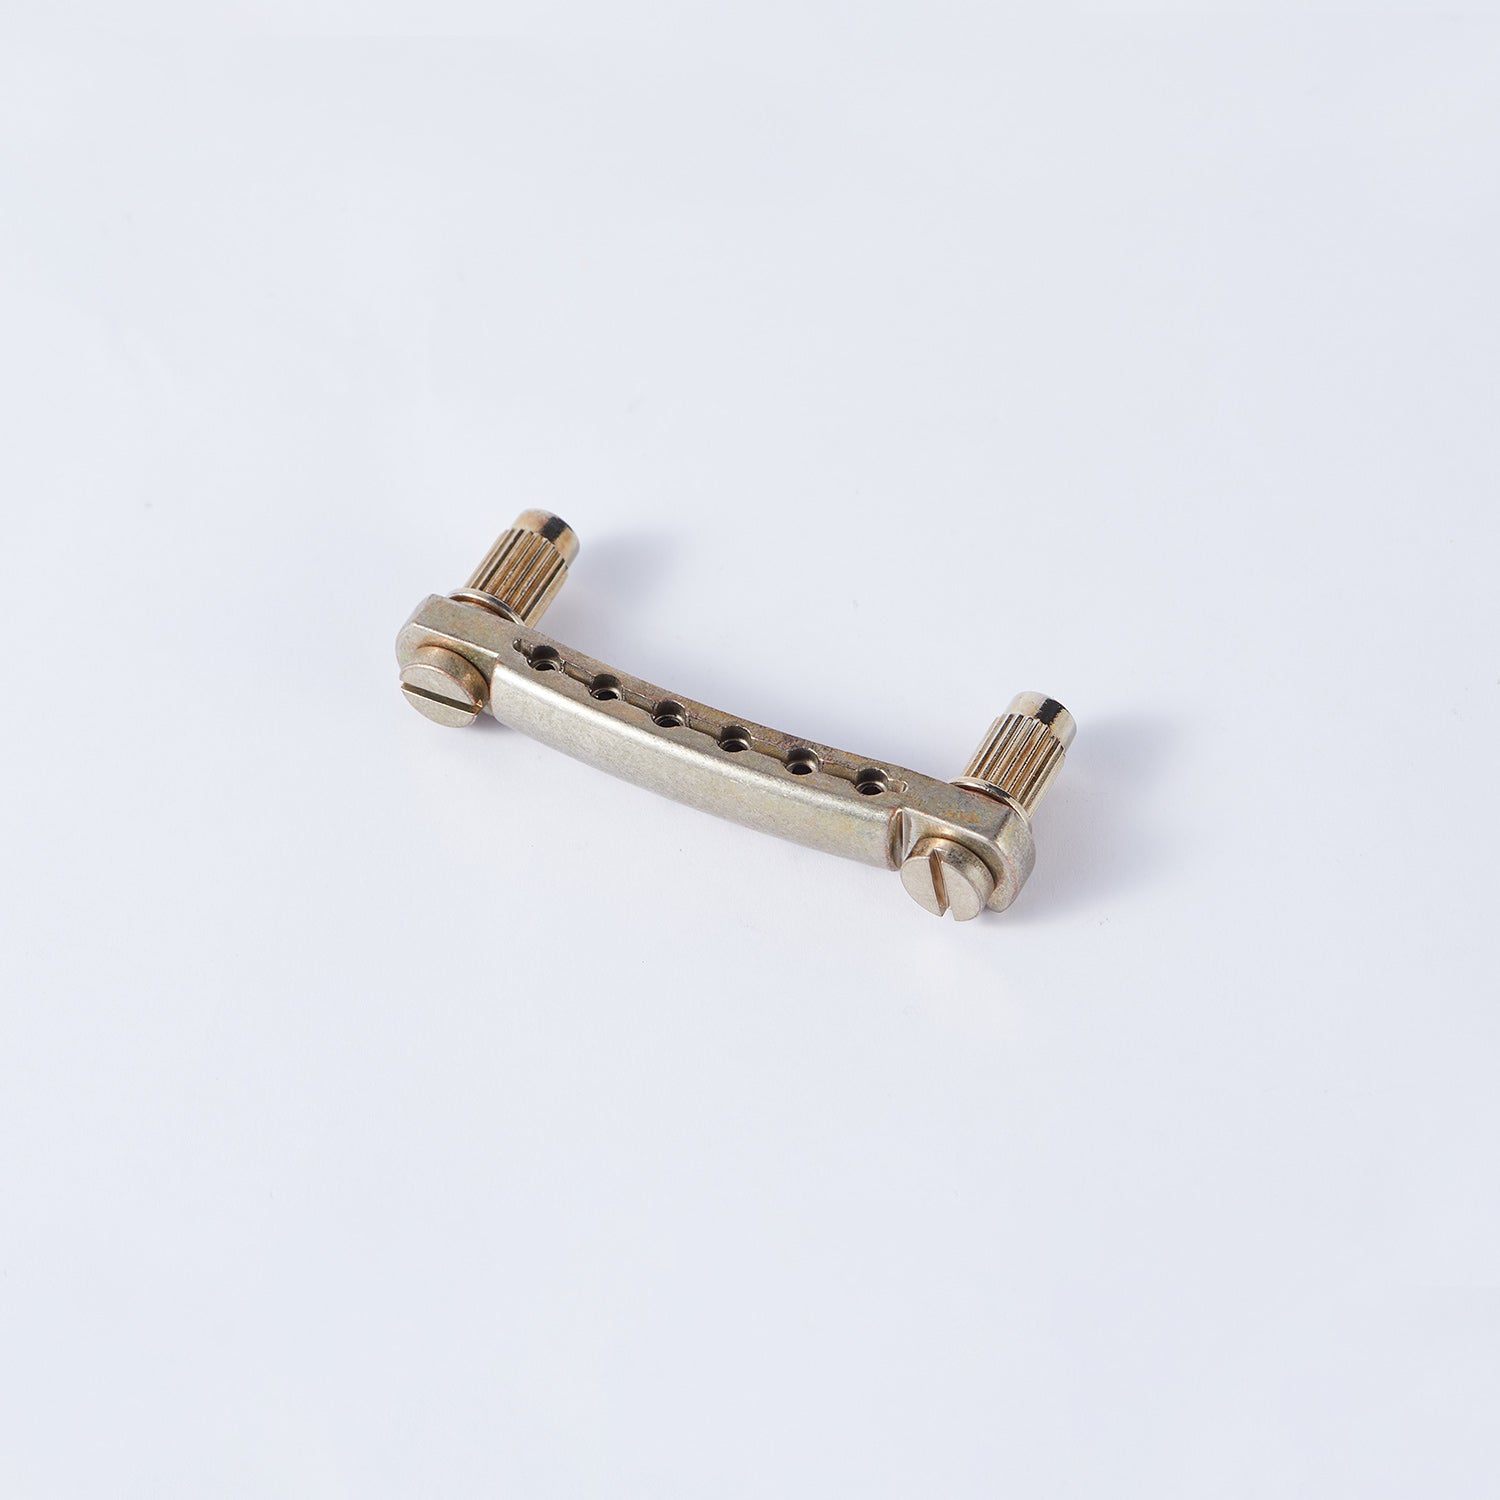 Guyker Guitar Tune-O-Matic Tailpiece Stop Bar with Studs - Bridges Parts Replacement for LP SG Style 6 String Electric Guitar